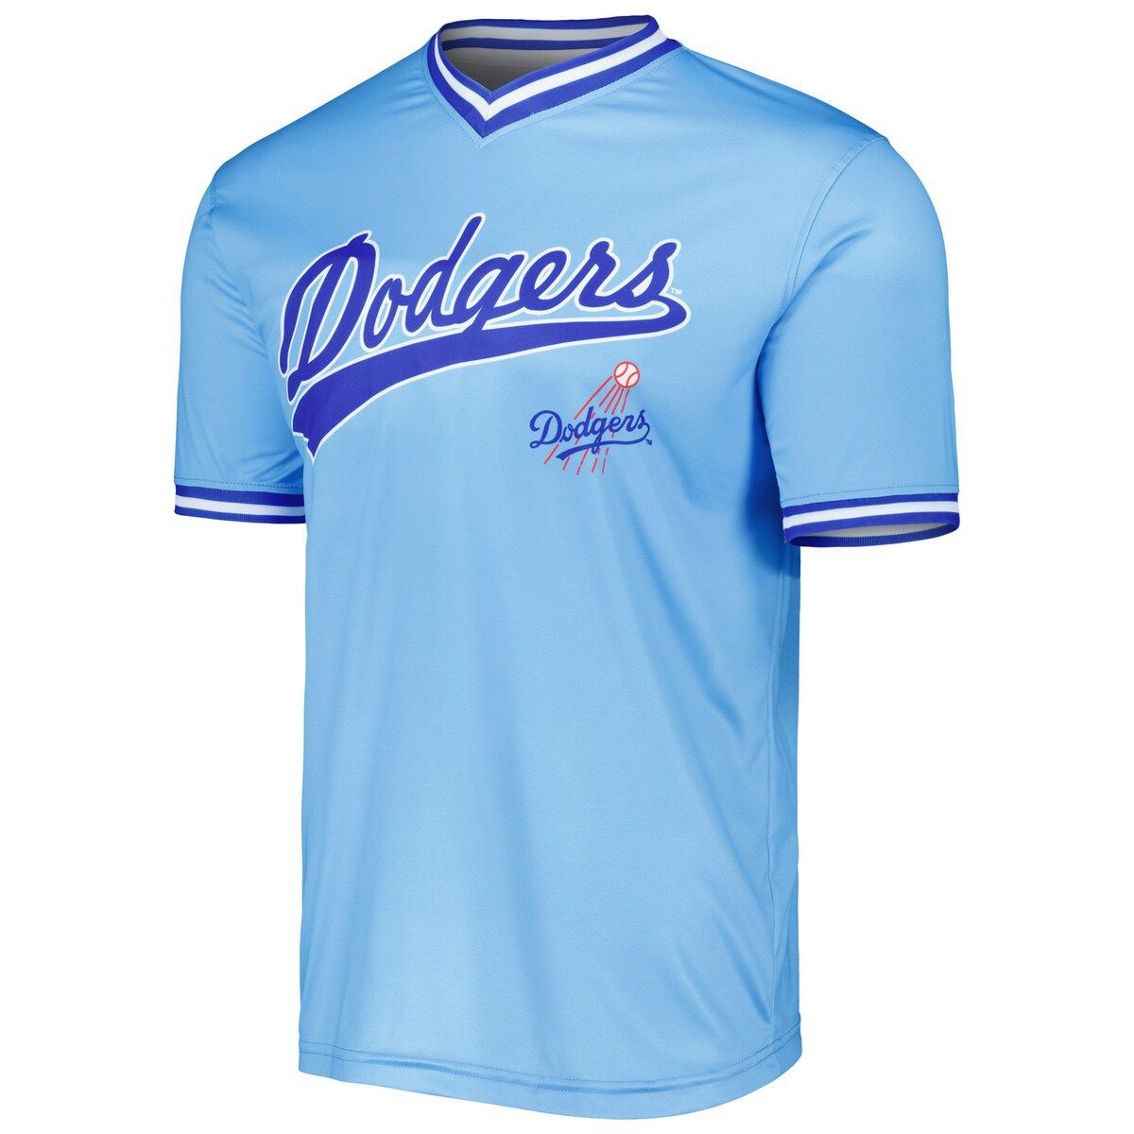 Stitches Men's Light Blue Los Angeles Dodgers Cooperstown Collection Team Jersey - Image 3 of 4